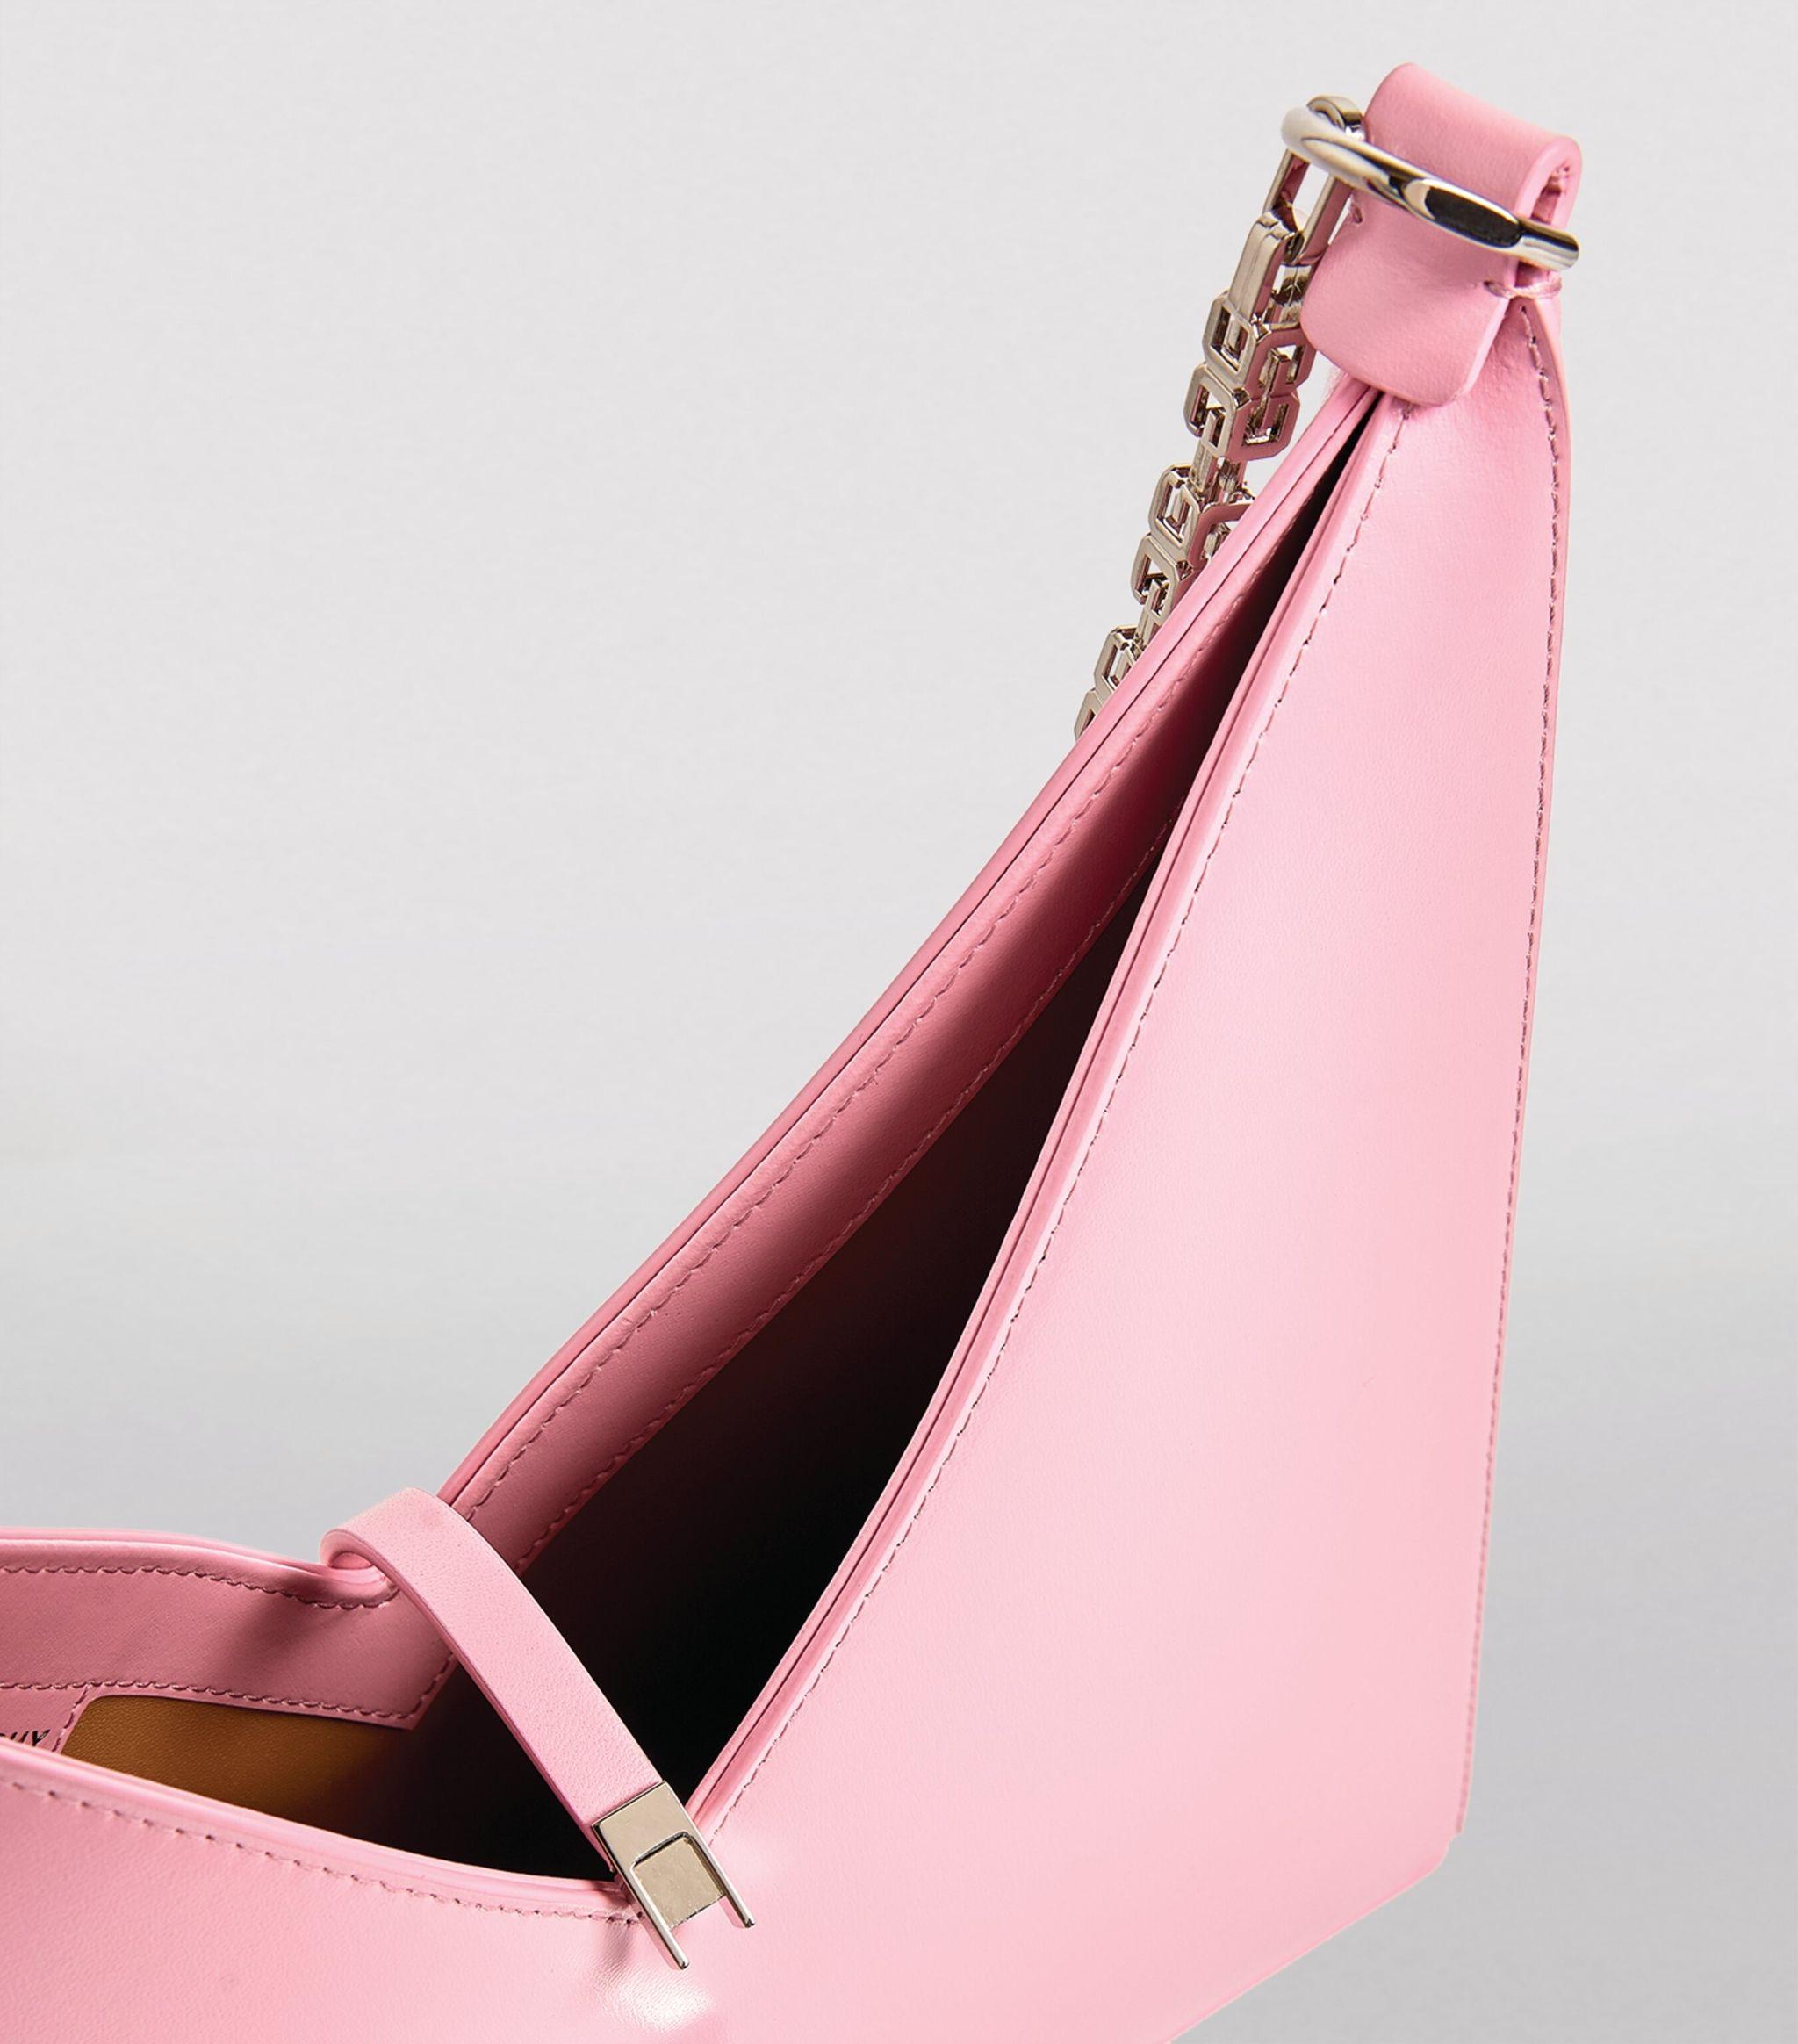 Givenchy Small Leather Cut Out Shoulder Bag in Pink - Lyst